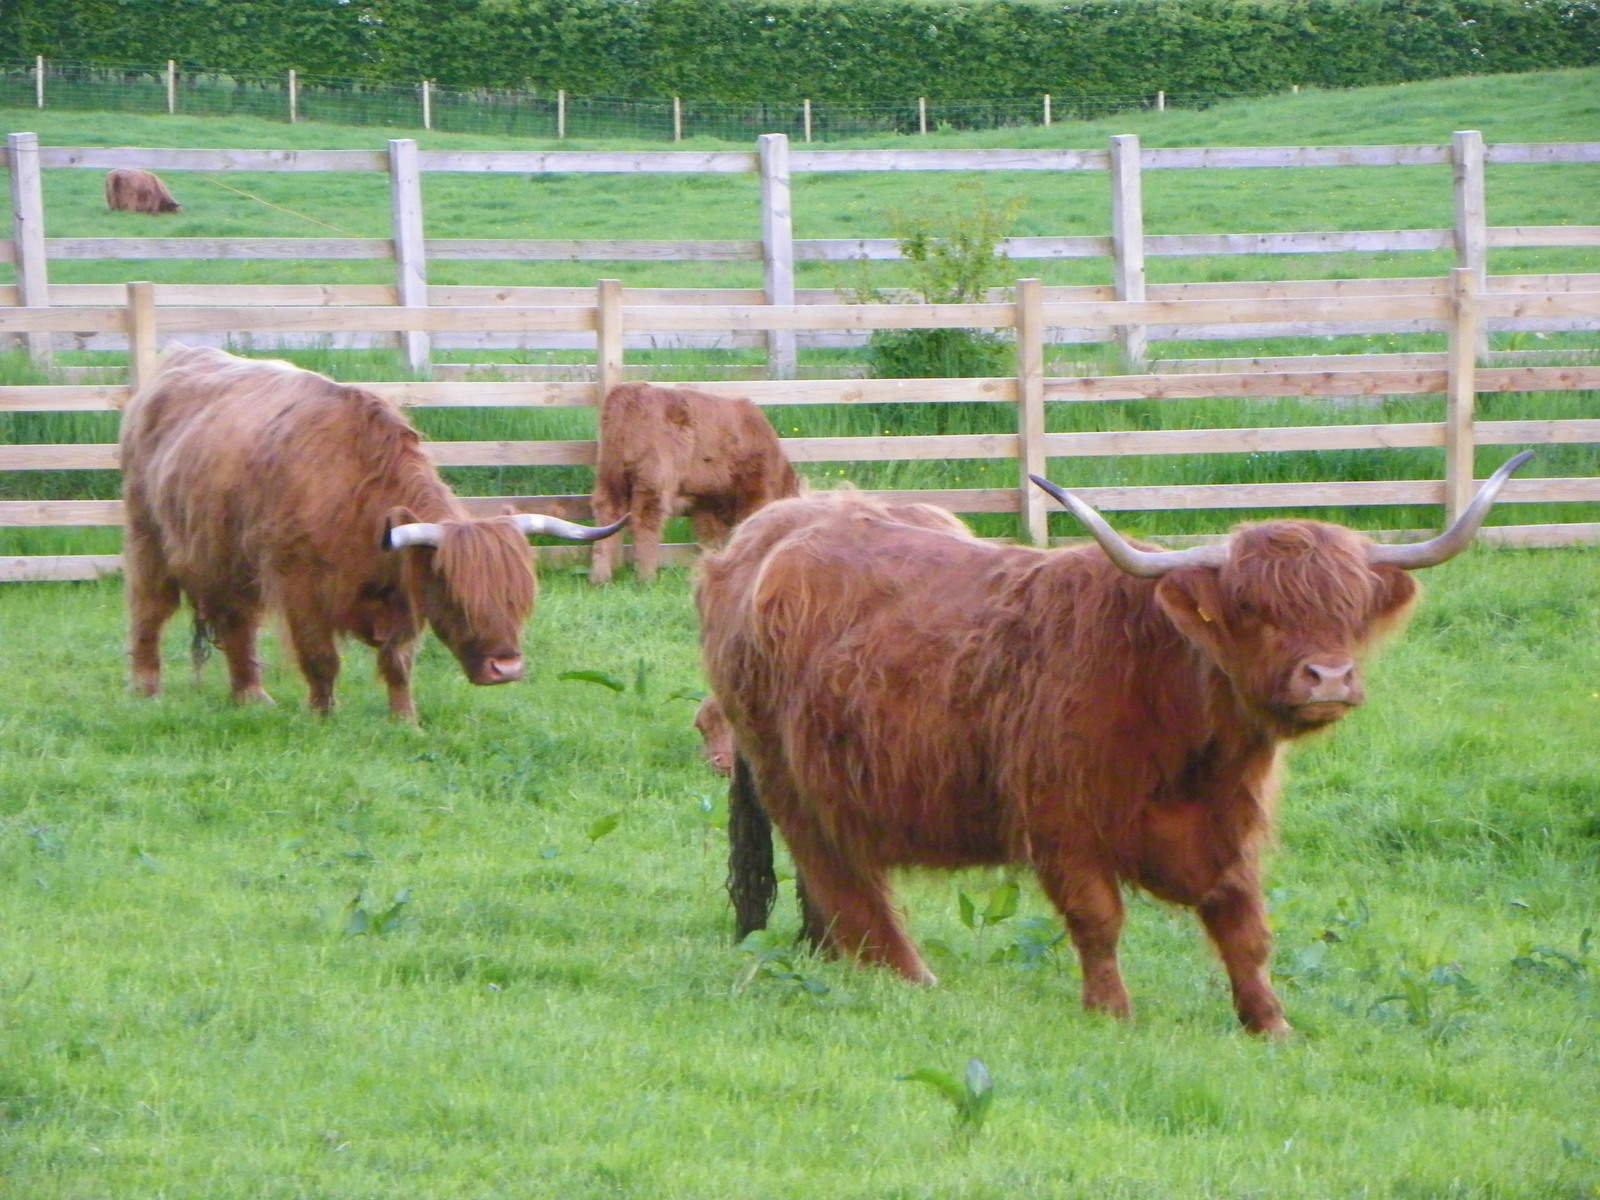 A luxury self-catering holiday at Blairmore Farm in Perth and Kinross, Scotland